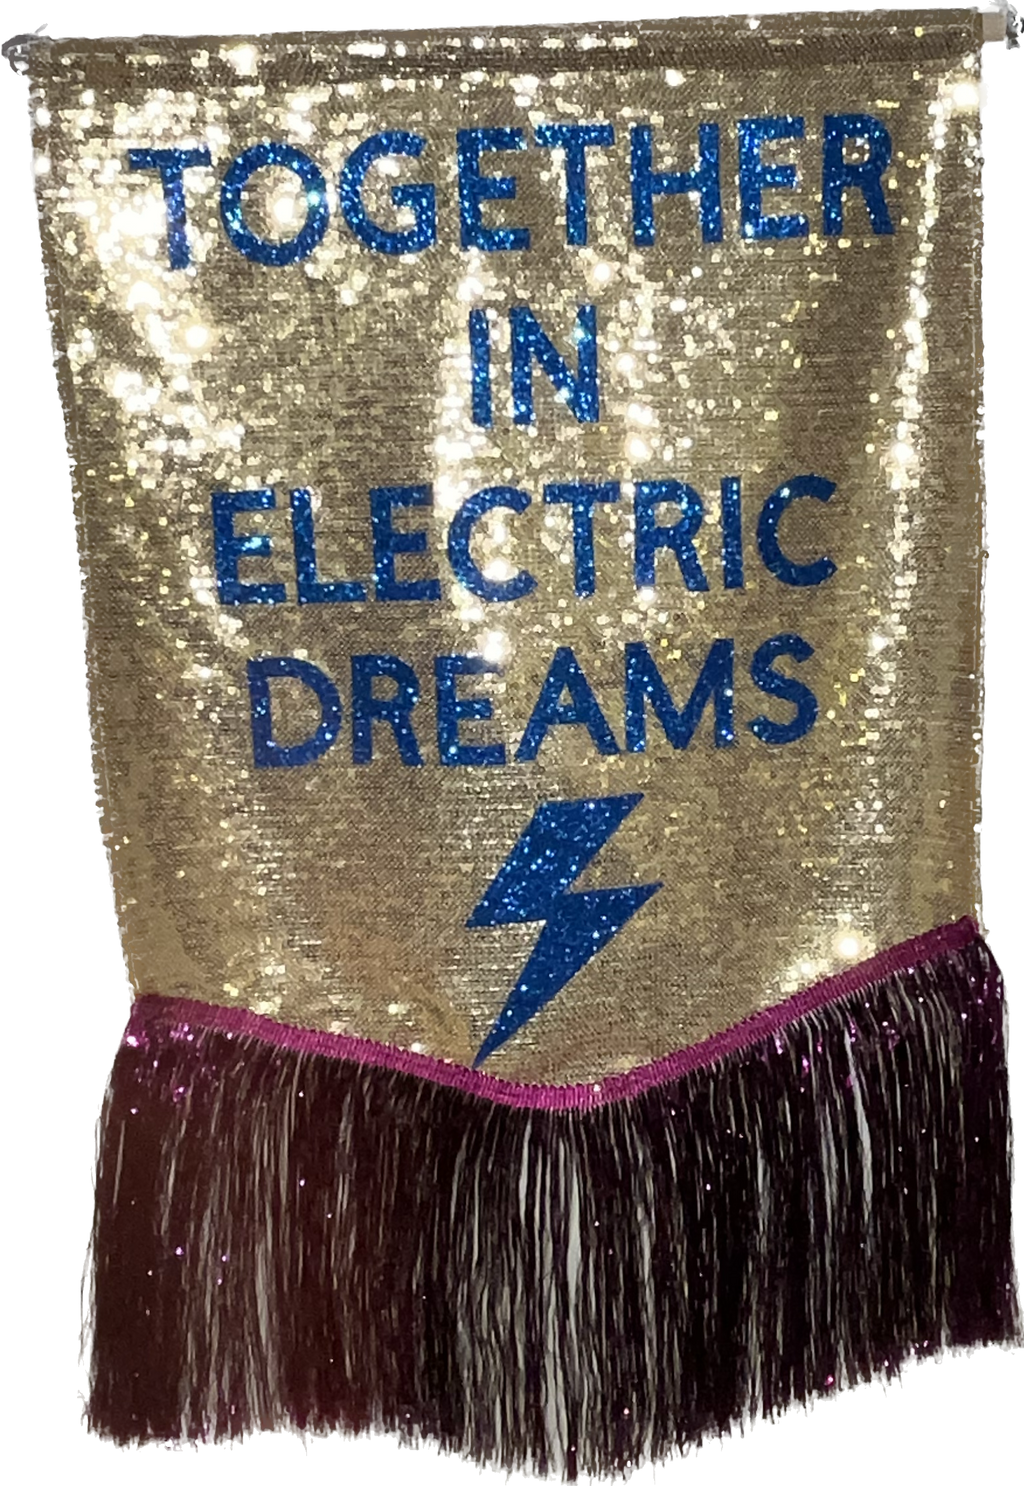 'Together In Electric Dreams' Banner